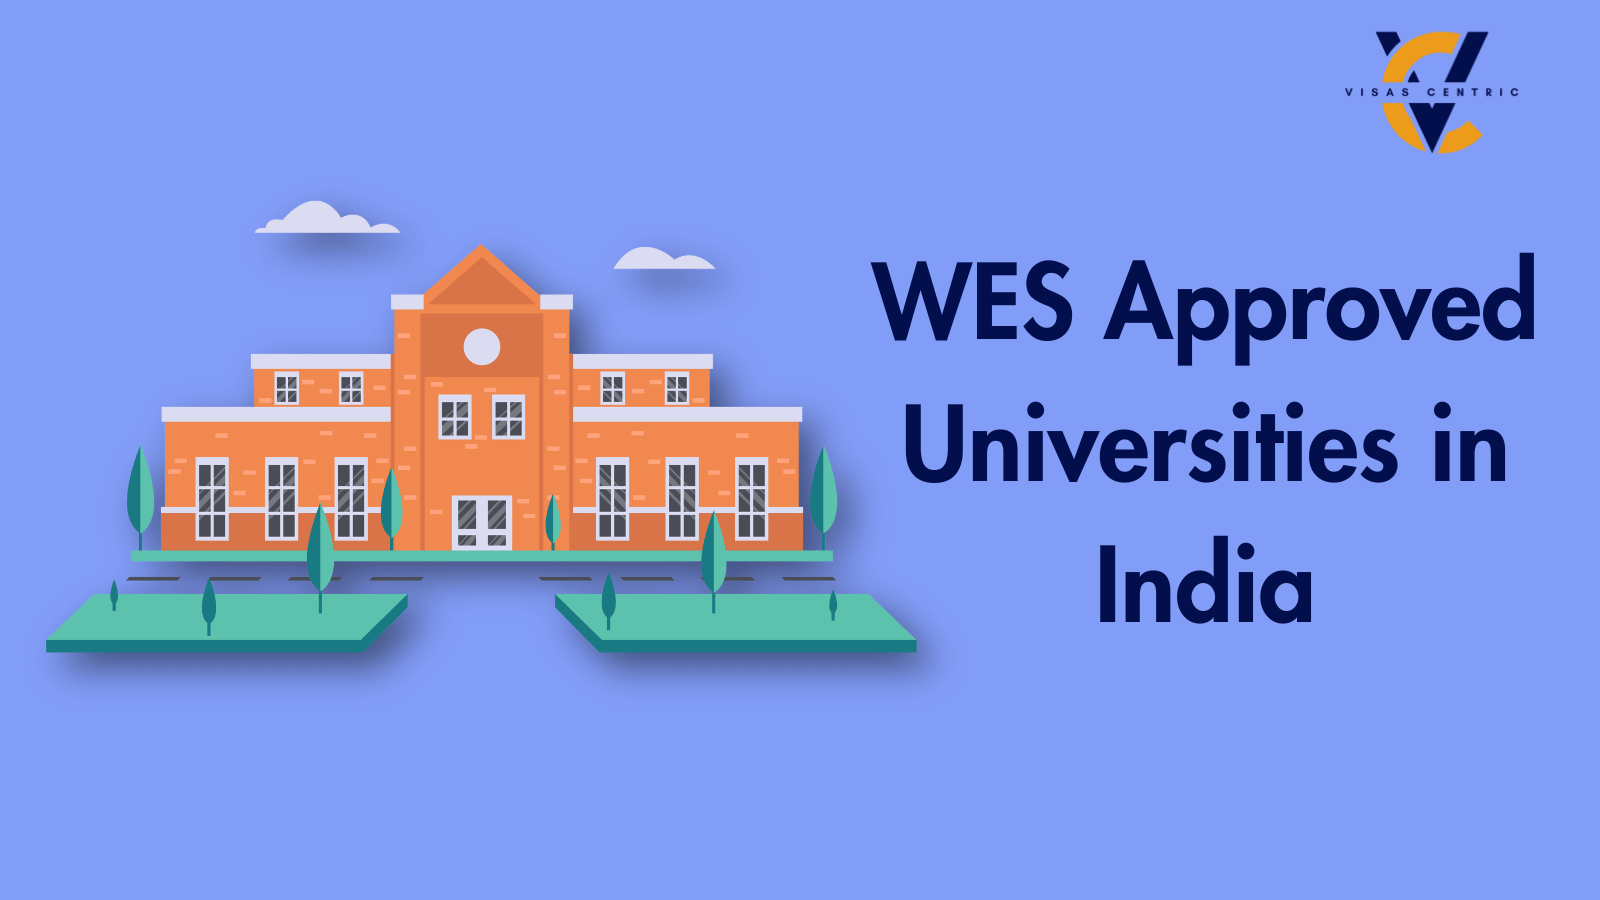 WES Approved Universities in India